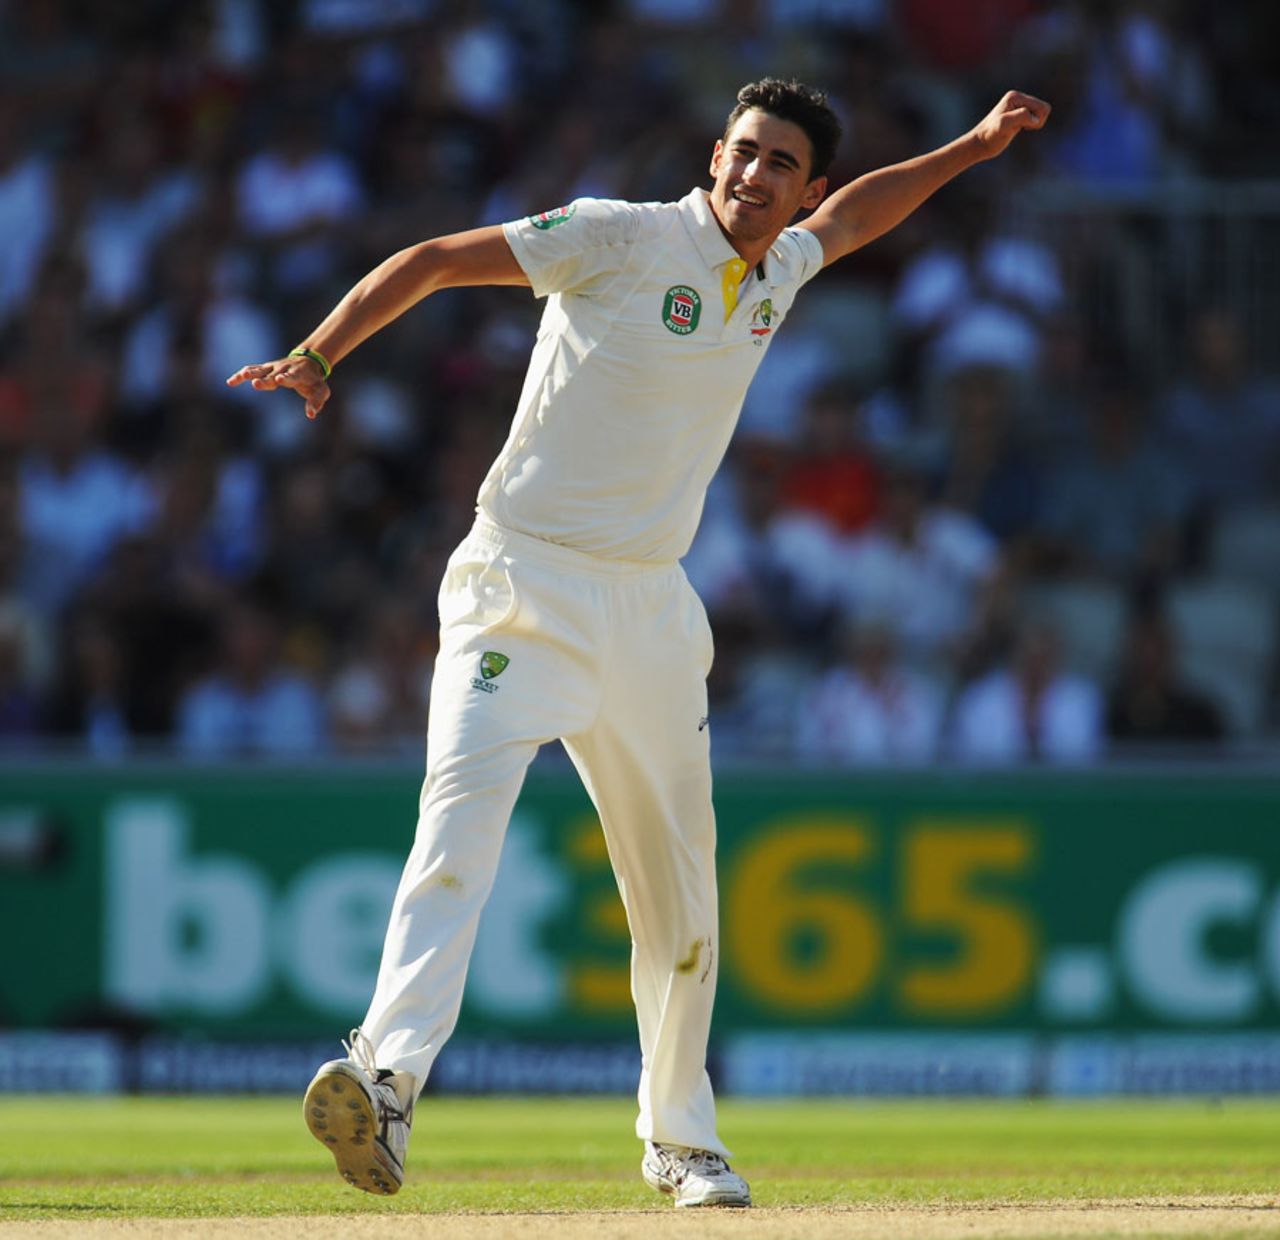 Mitchell Starc celebrates removing Kevin Pietersen, England v Australia, 3rd Investec Test, Old Trafford, 3rd day, August 3, 2013